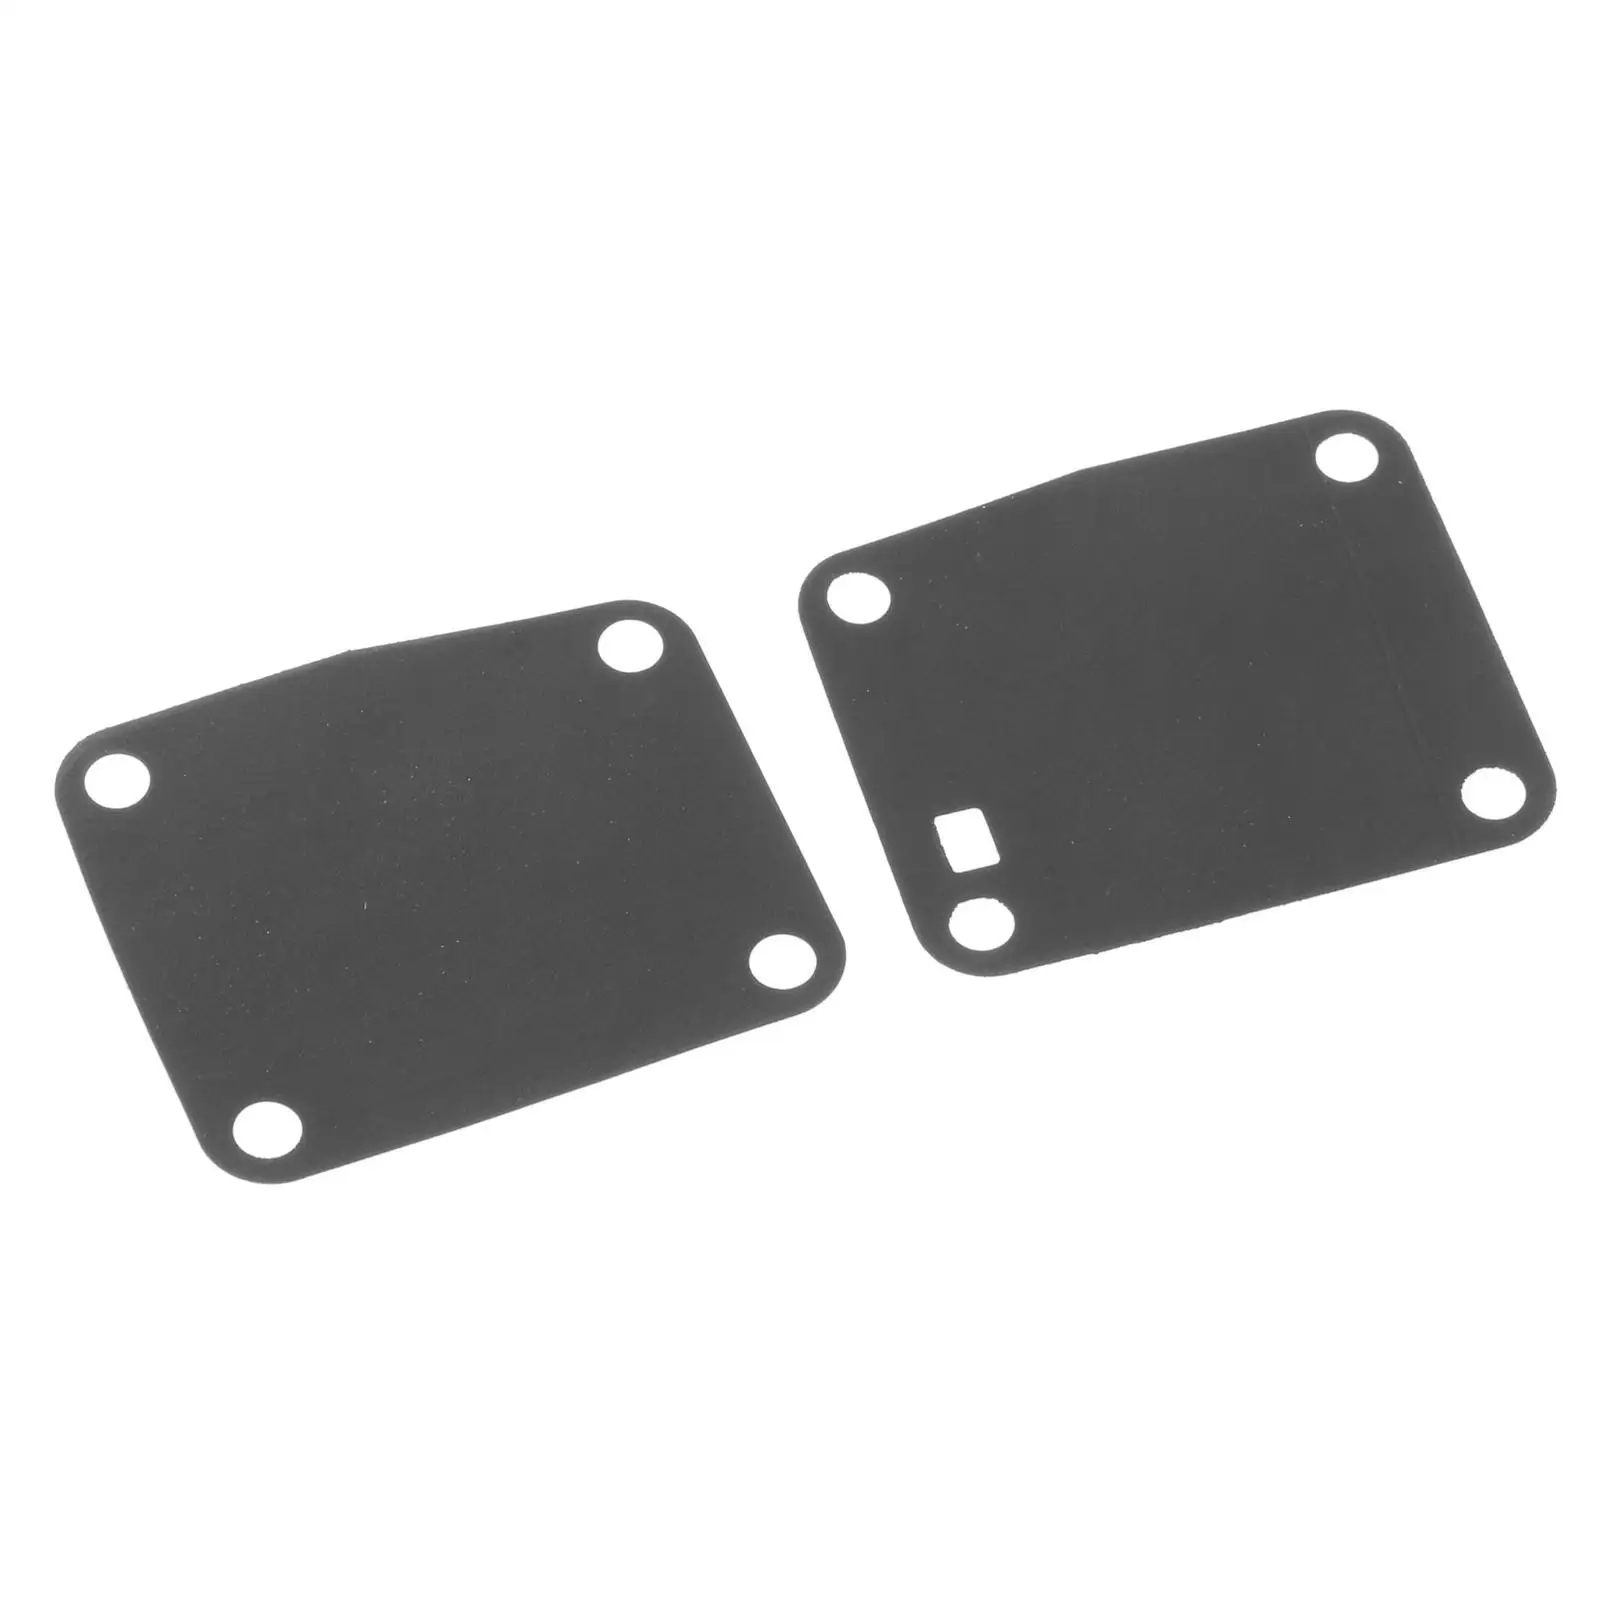 Fuel Diaphragm Set 63V-24411 6411 .9-15-Stroke Outboard Direct Replaces Easy to Install